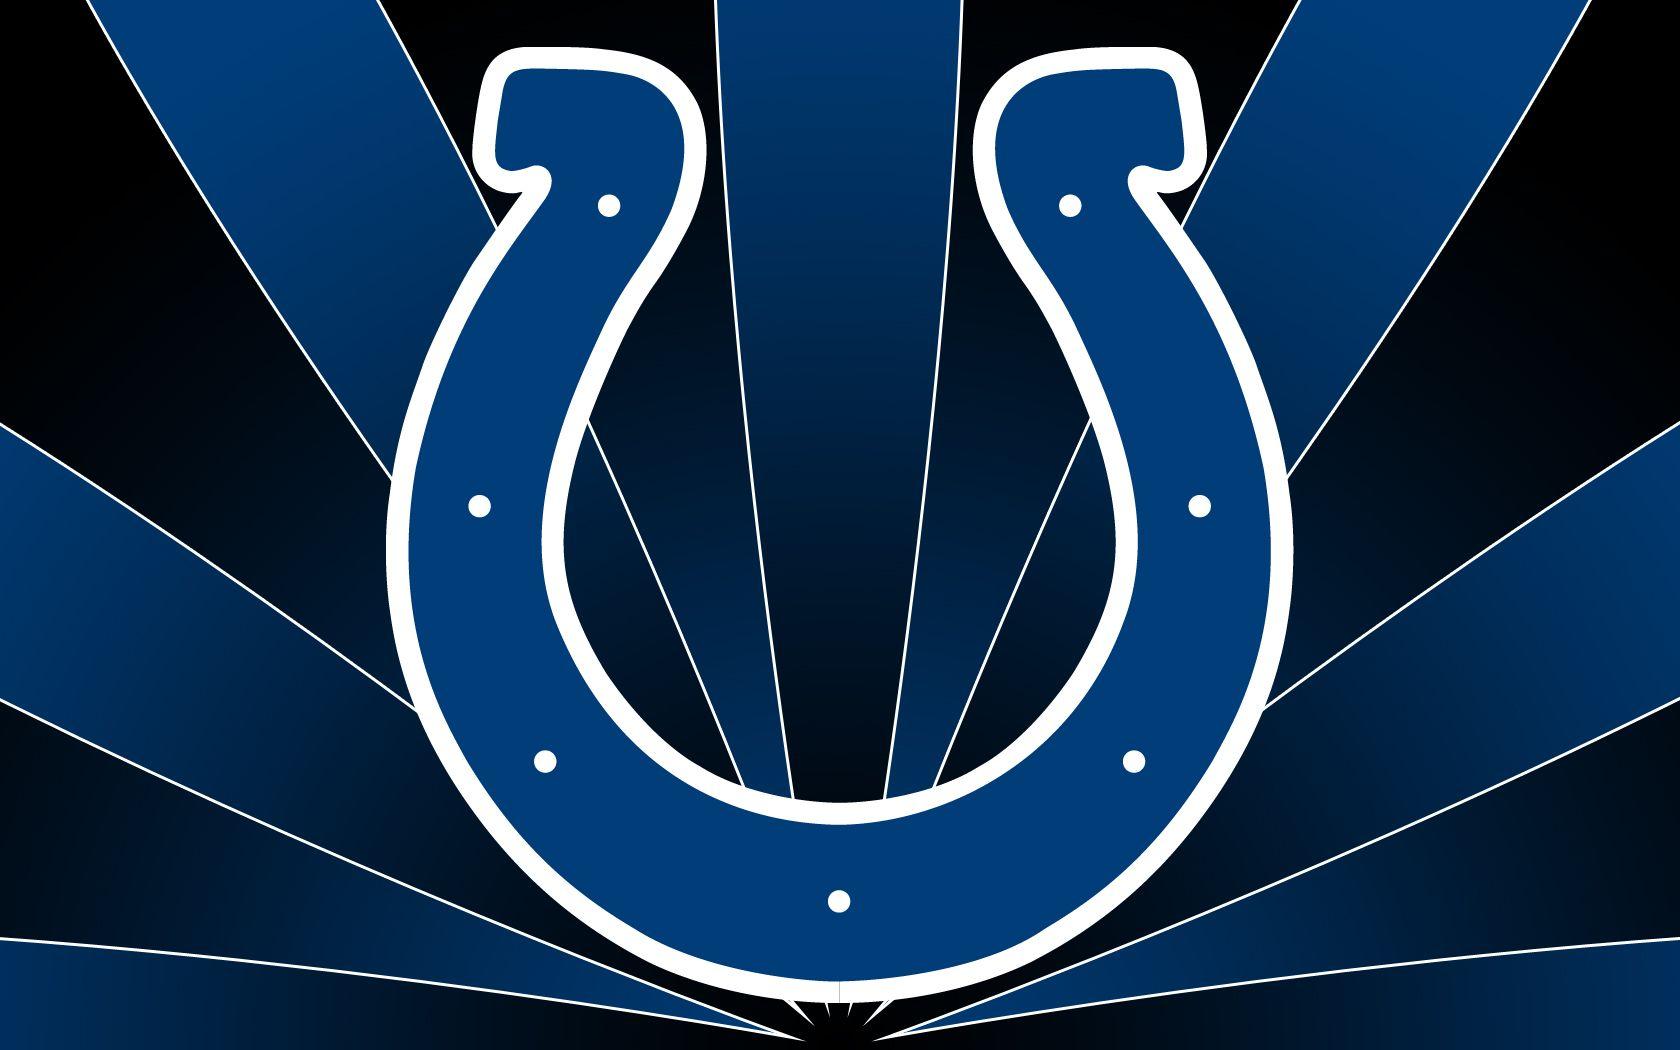 Colts Logo Wallpaper Image & Picture